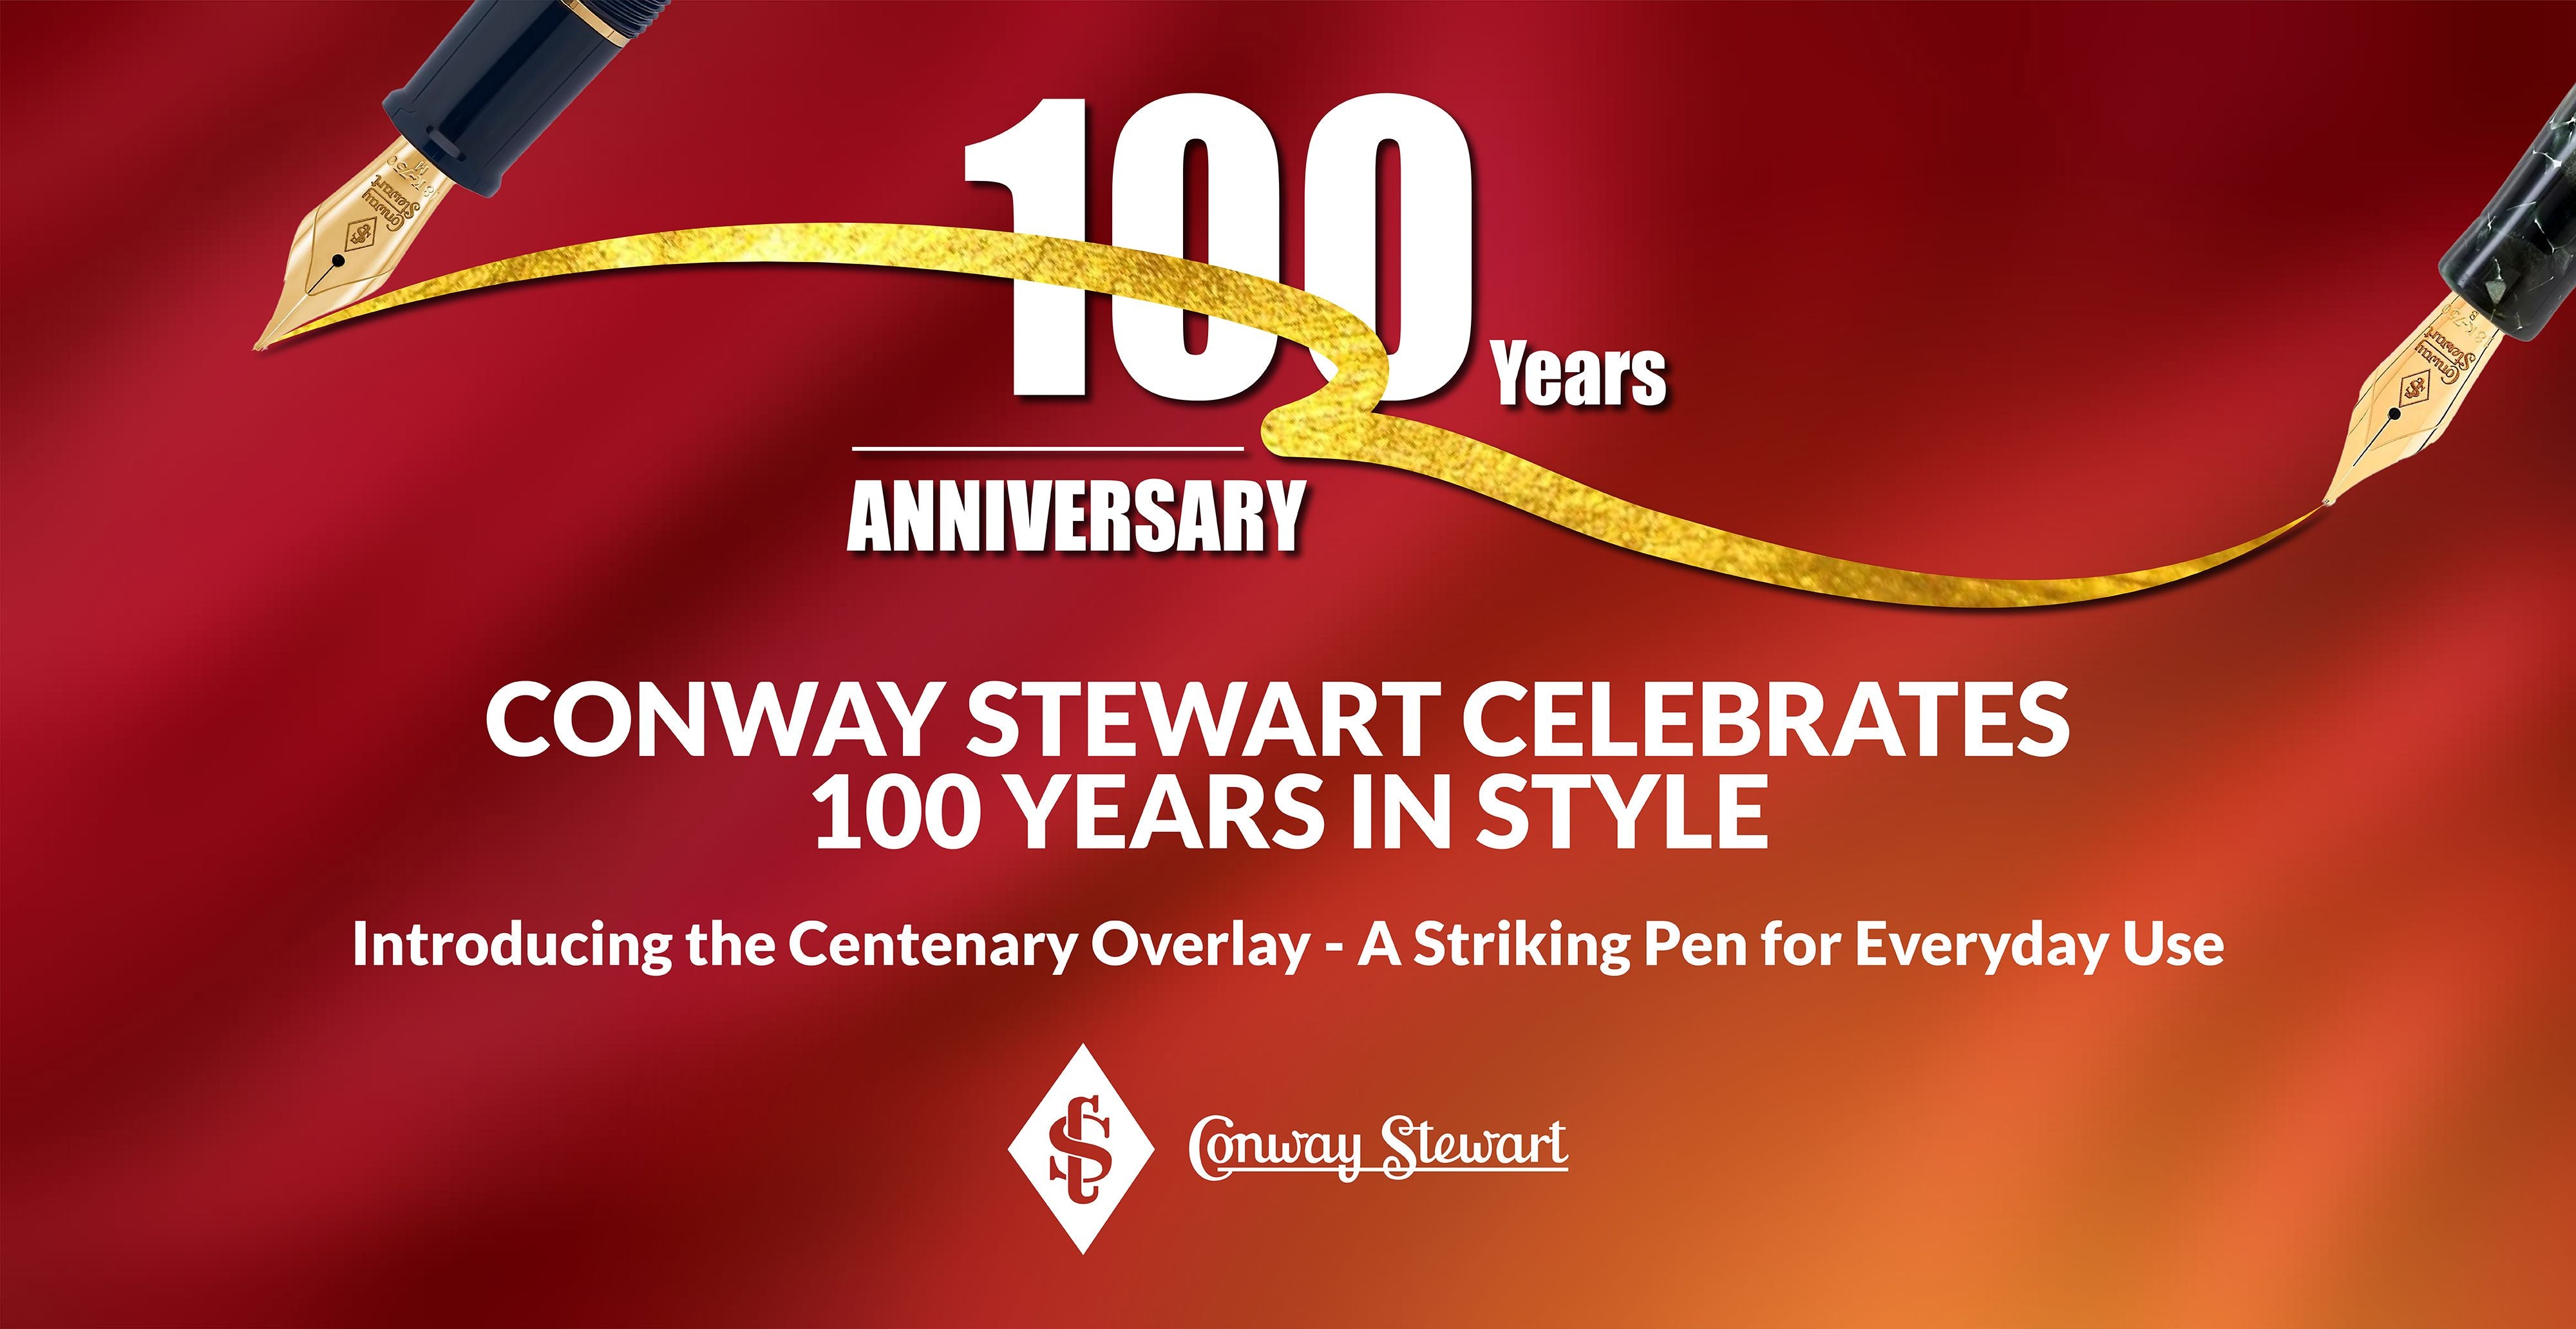 Conway Stewart Celebrates 100 Years in Style, 2006